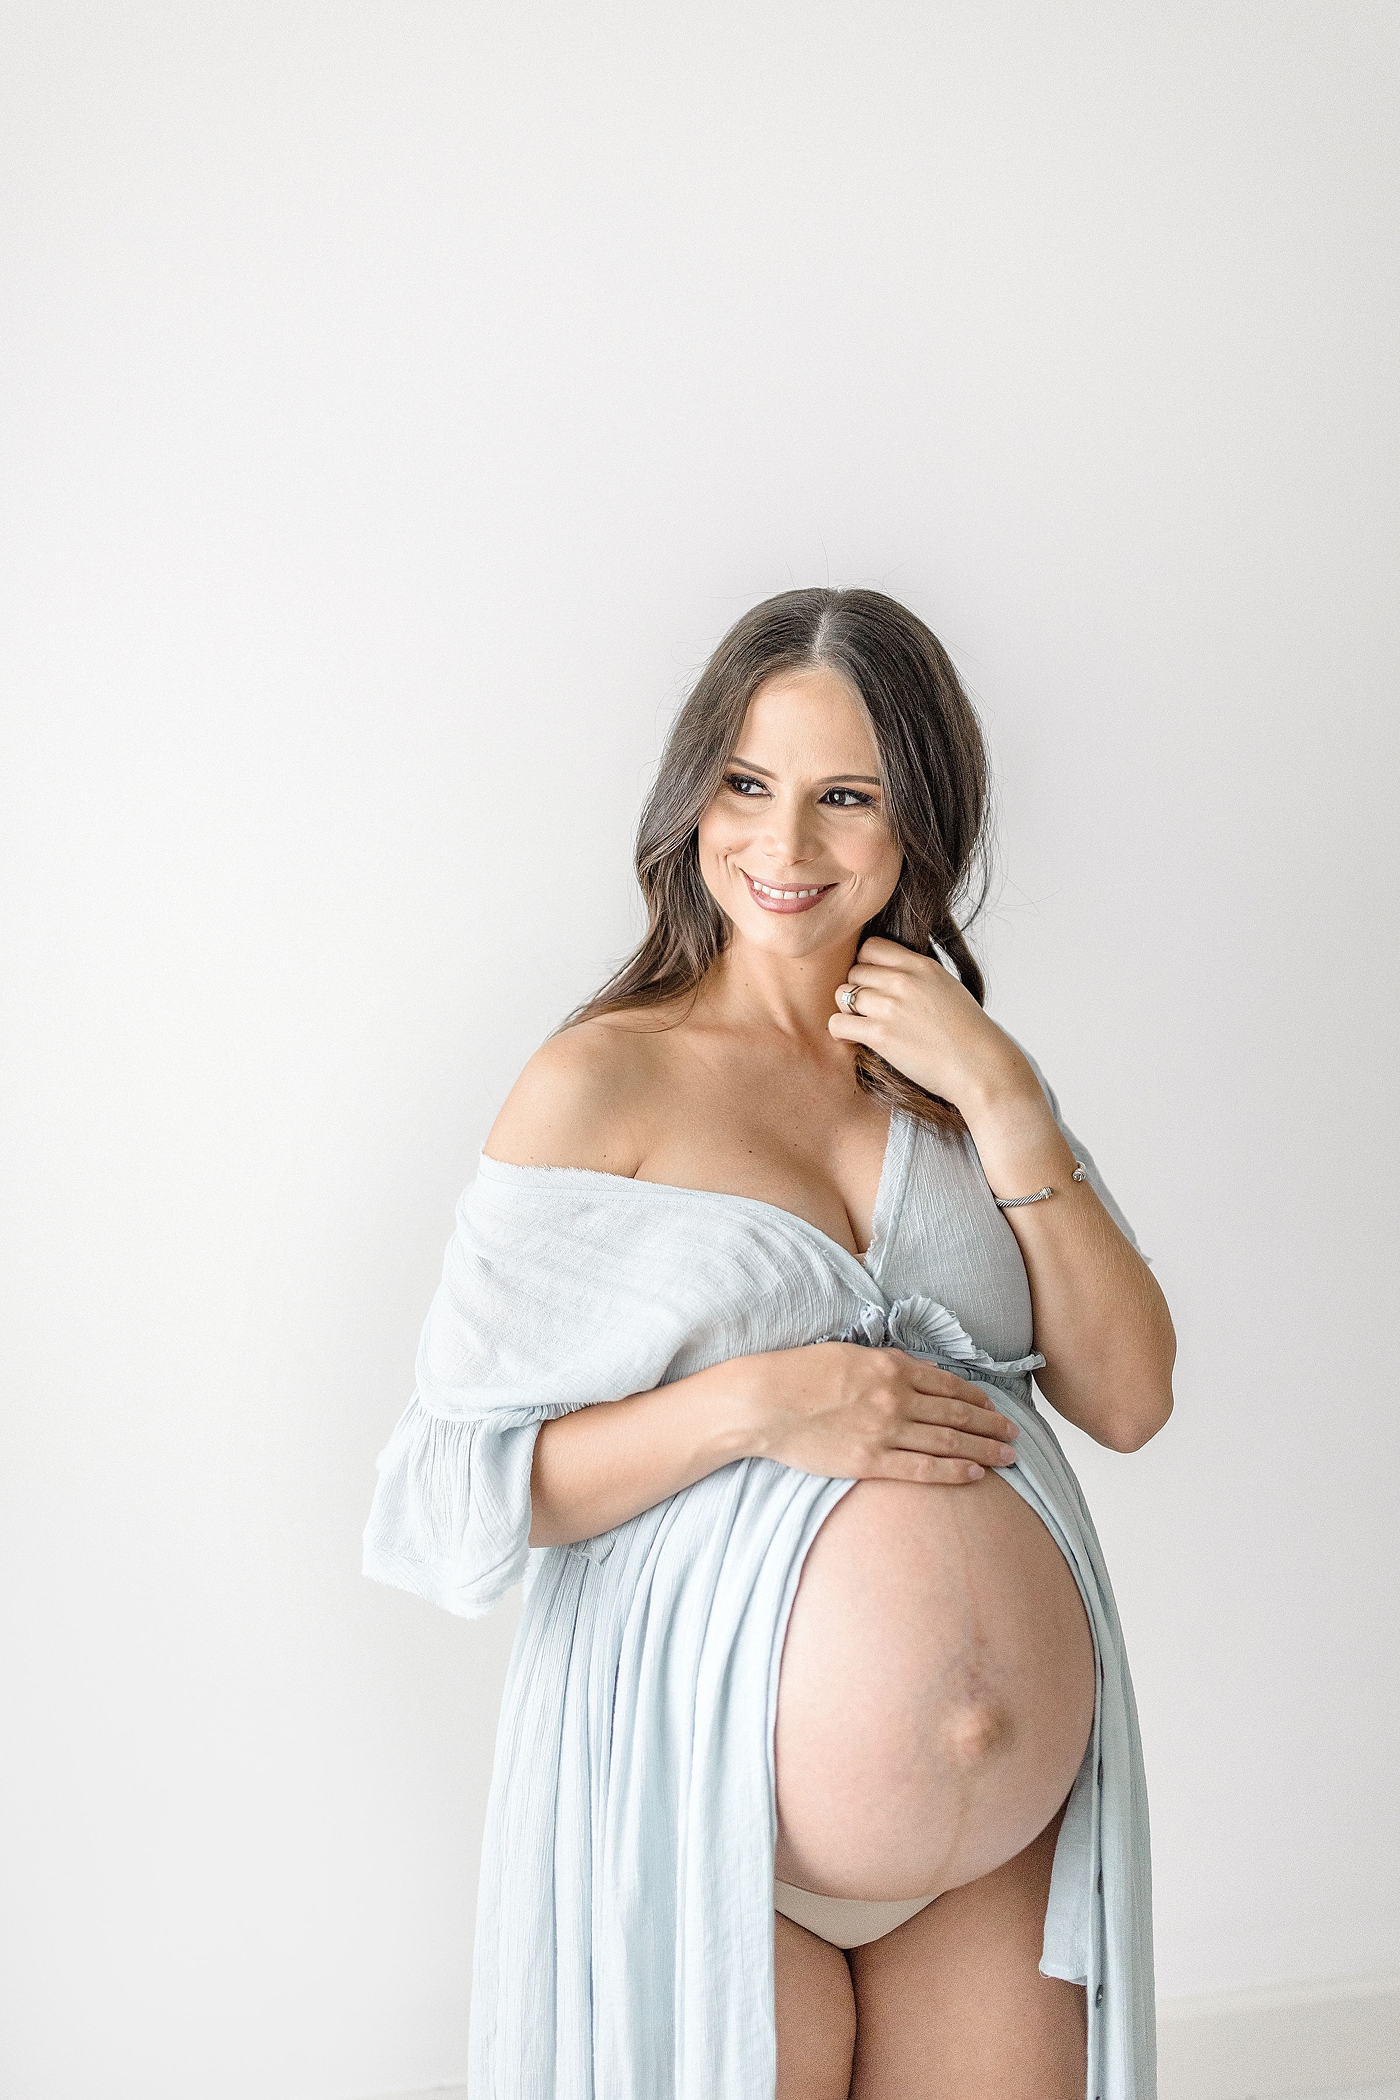 Glowing mama smiles during maternity session in studio. Photo by Ivanna Vidal Photography.